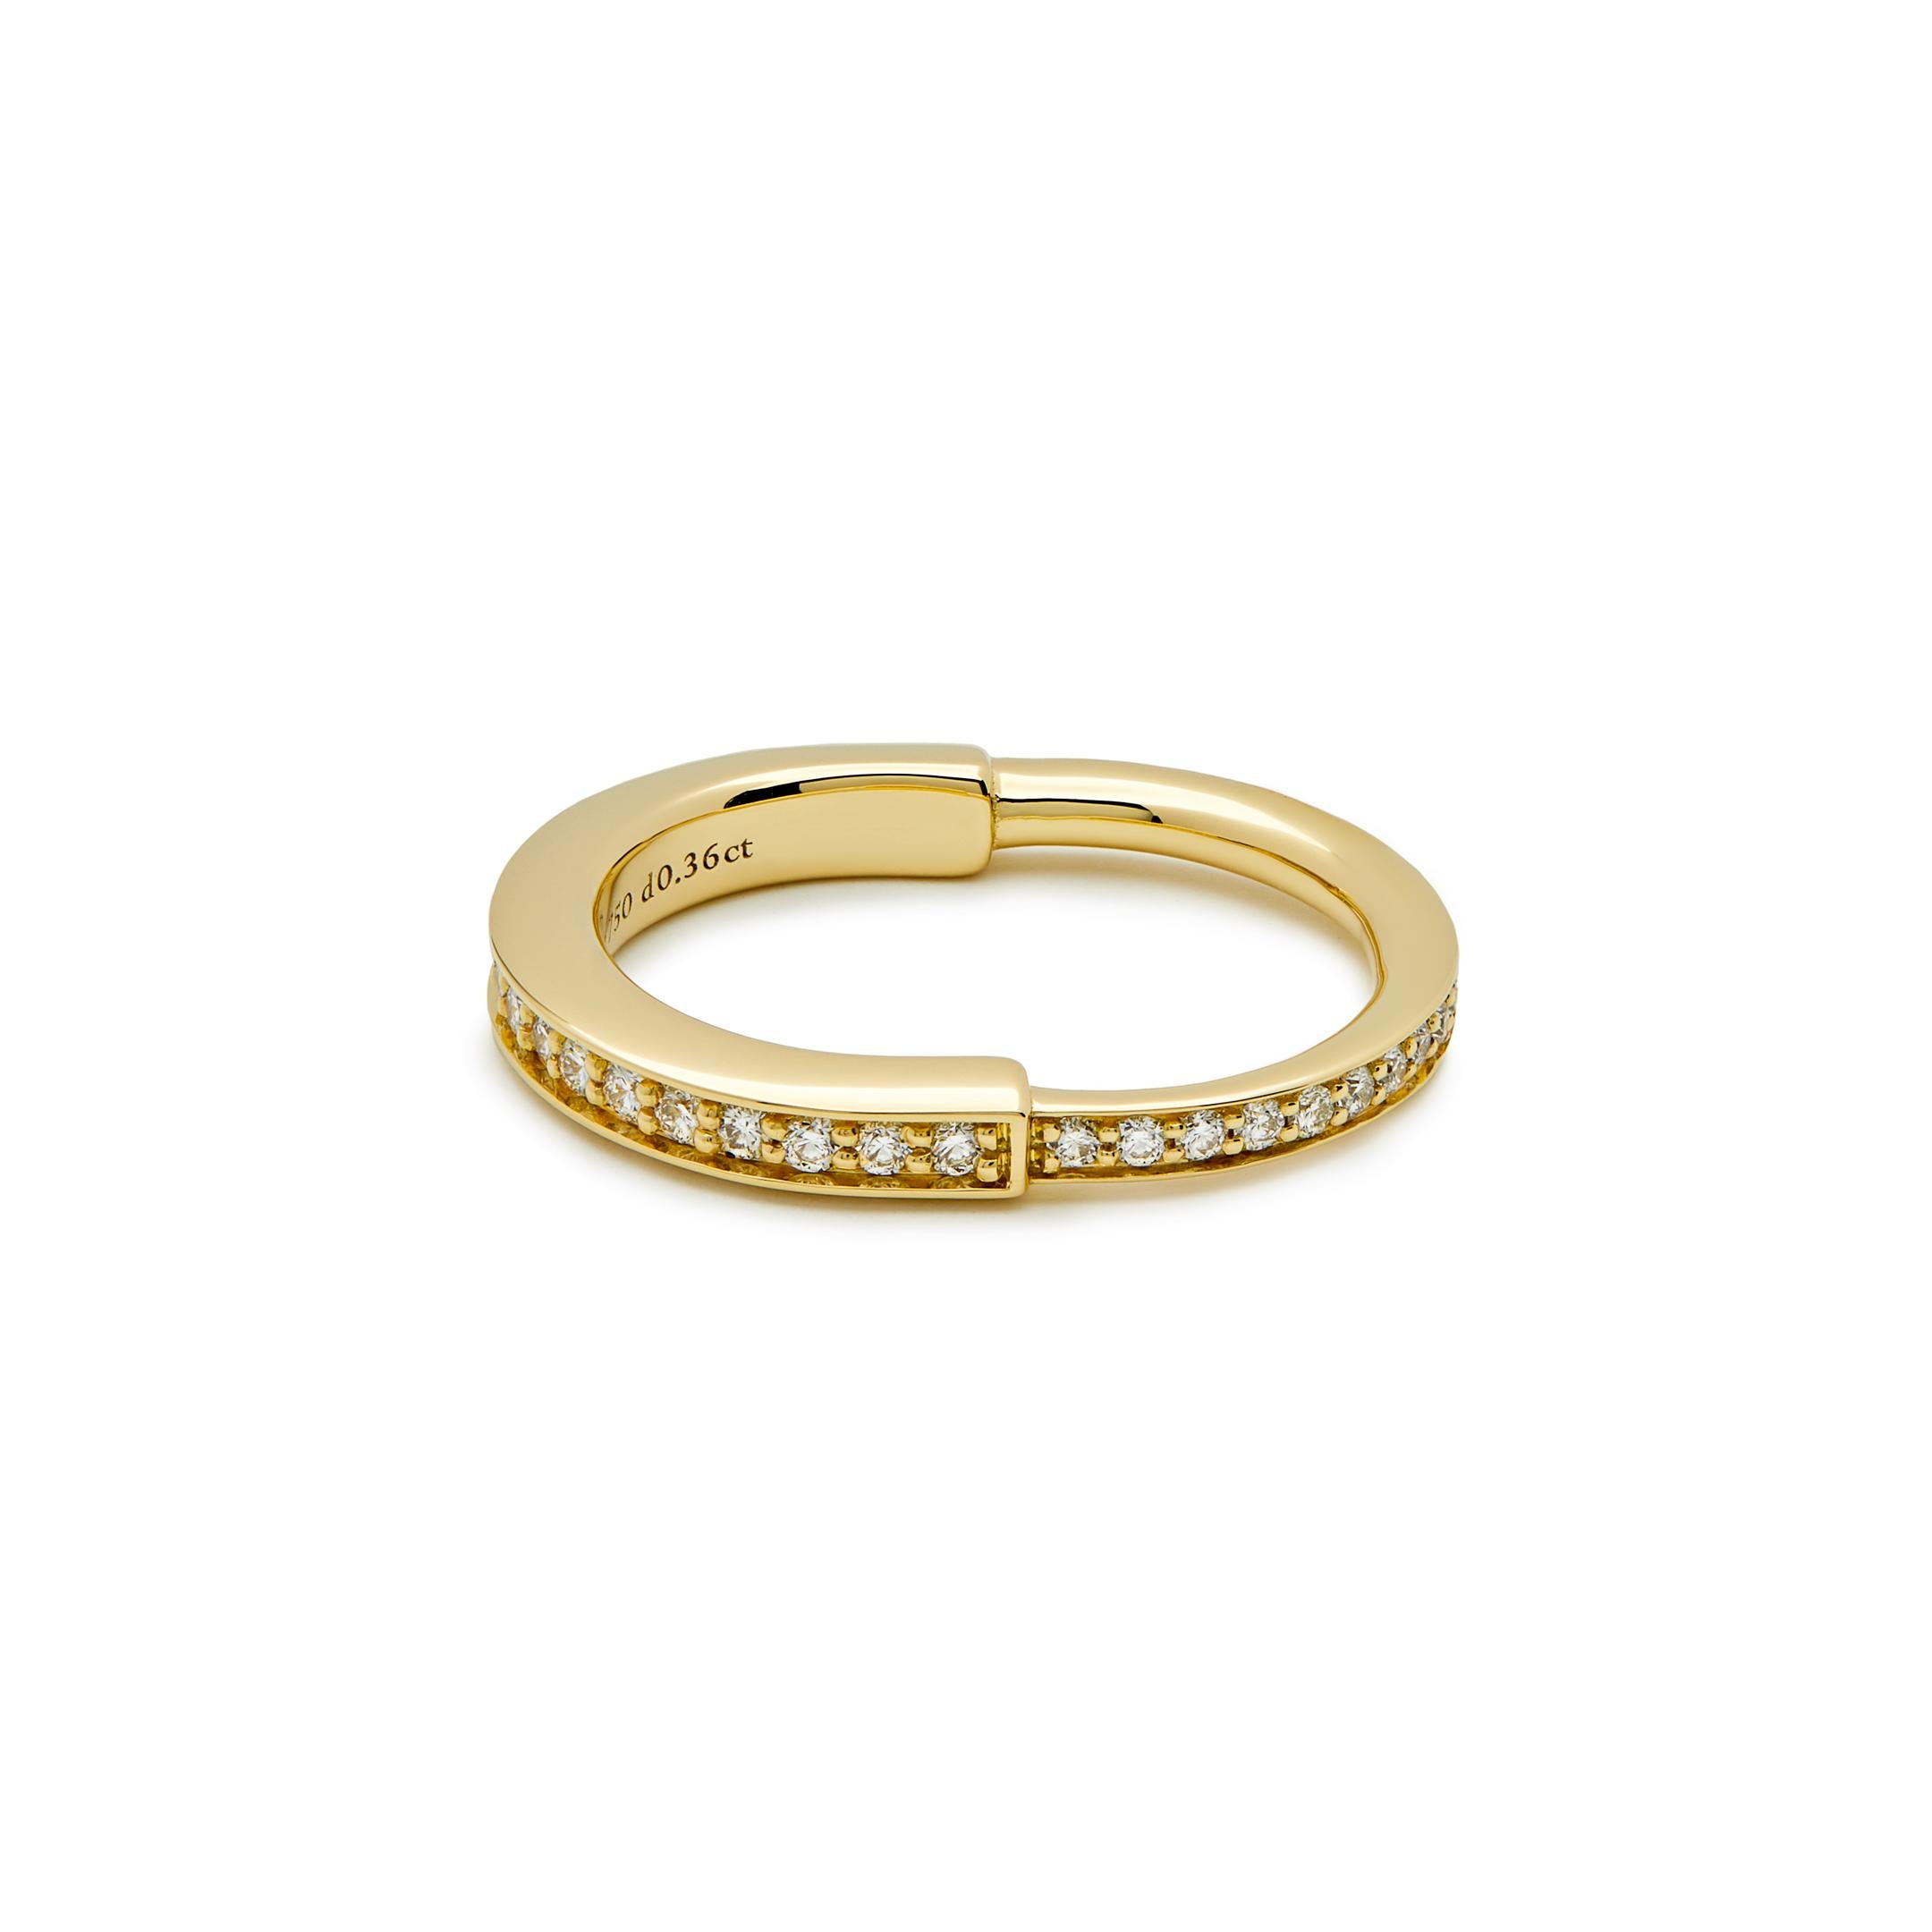 The Tiffany & Co. Lock ring is a bold symbol of unity and diversity, celebrating personal connections that shape us. Crafted in 18-karat yellow gold with round brilliant, this ring is a stylish choice whether worn alone or as part of your everyday